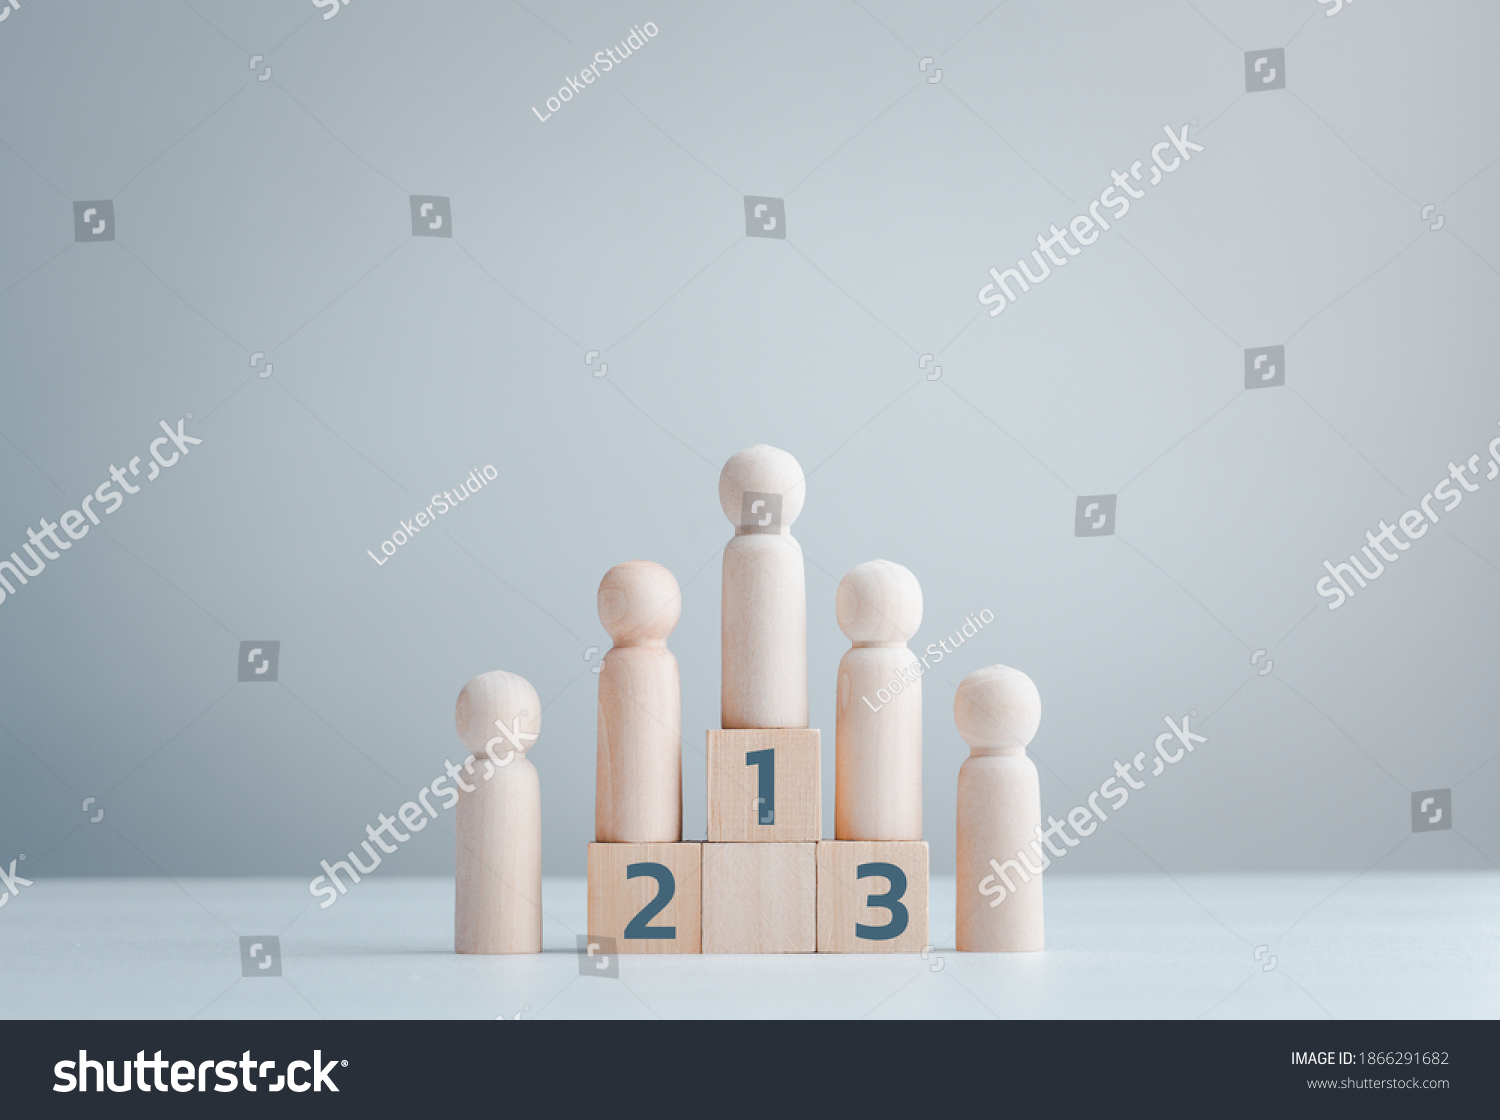 Business hierarchy, ranking and strategy concept with wood doll standing on a podium 1, 2, 3 of wooden building blocks with copy space. #1866291682